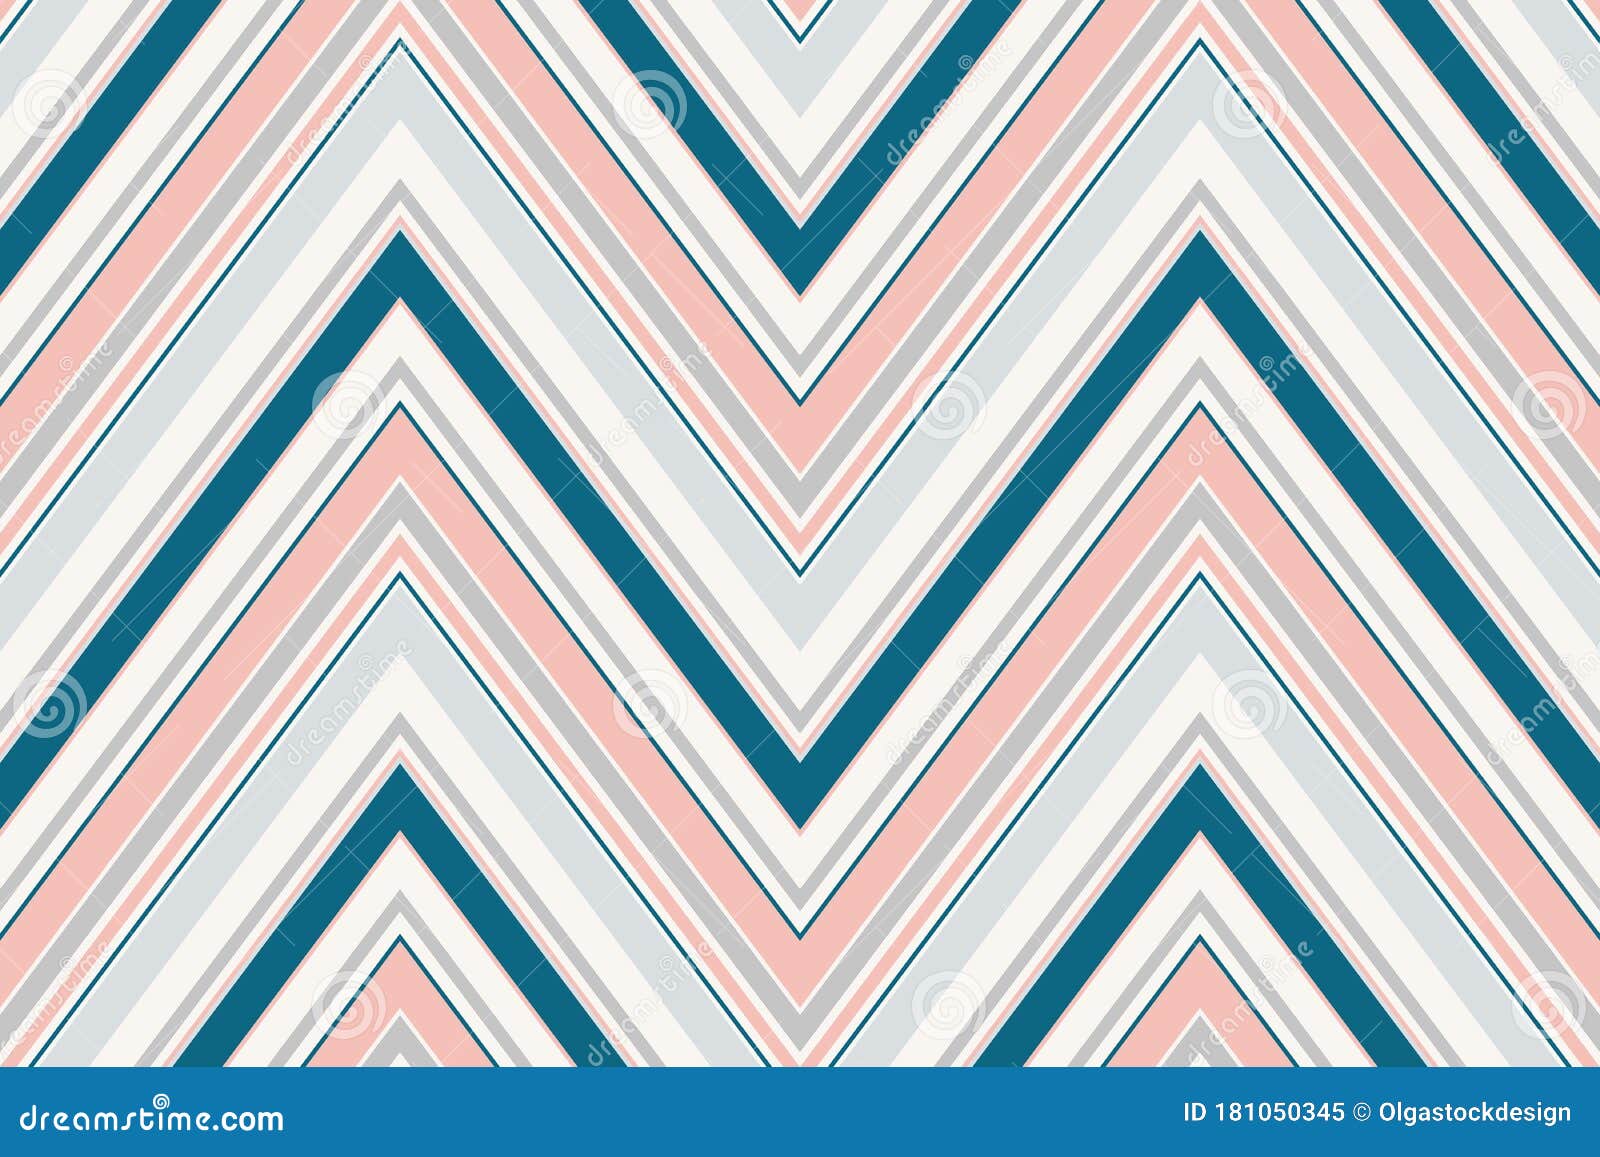 9x16 FT Chevron Vinyl Photography Backdrop,Hand Drawn Style Pattern with Zigzag Lines Horizontal Borders Geometric Background for Baby Birthday Party Wedding Studio Props Photography 